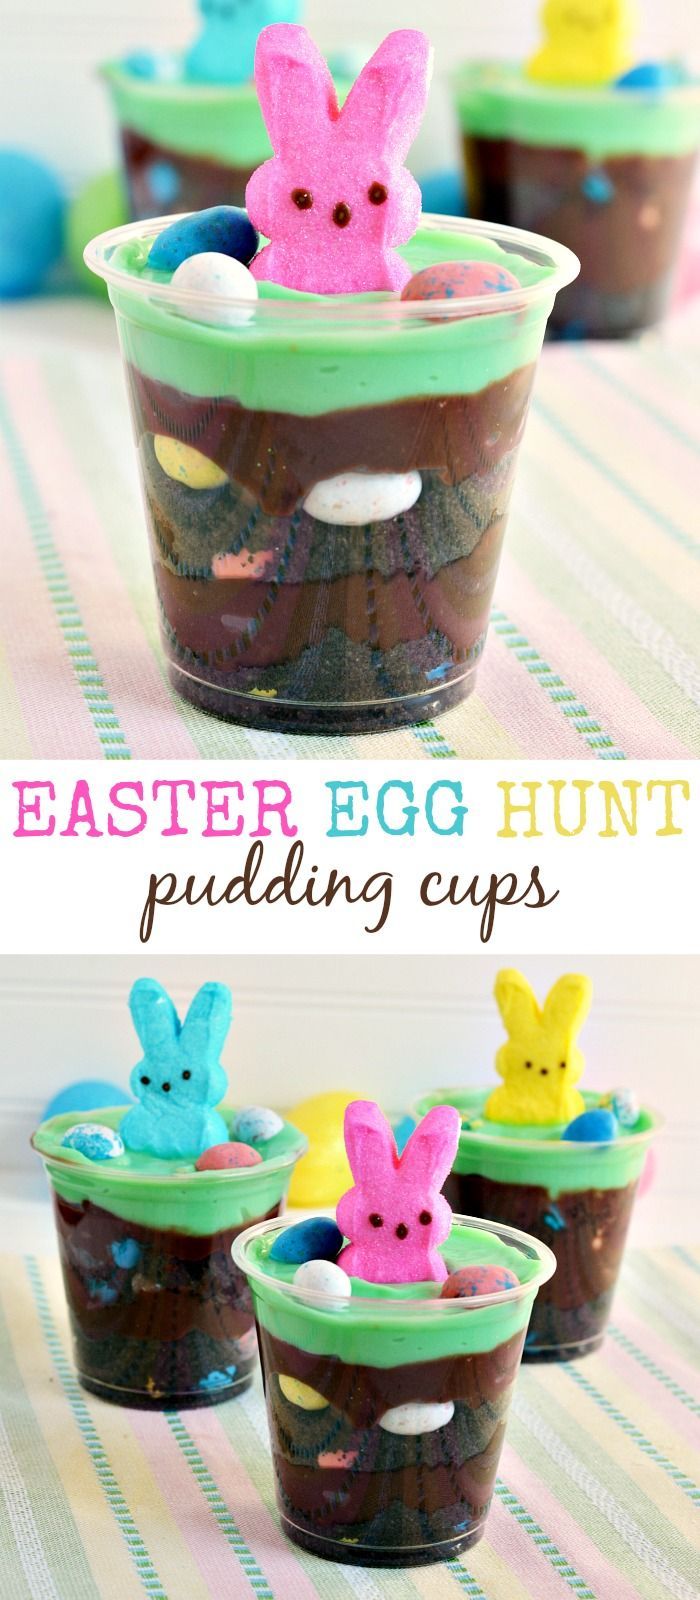 Easter Egg Hunt Pudding Cups with PEEPS